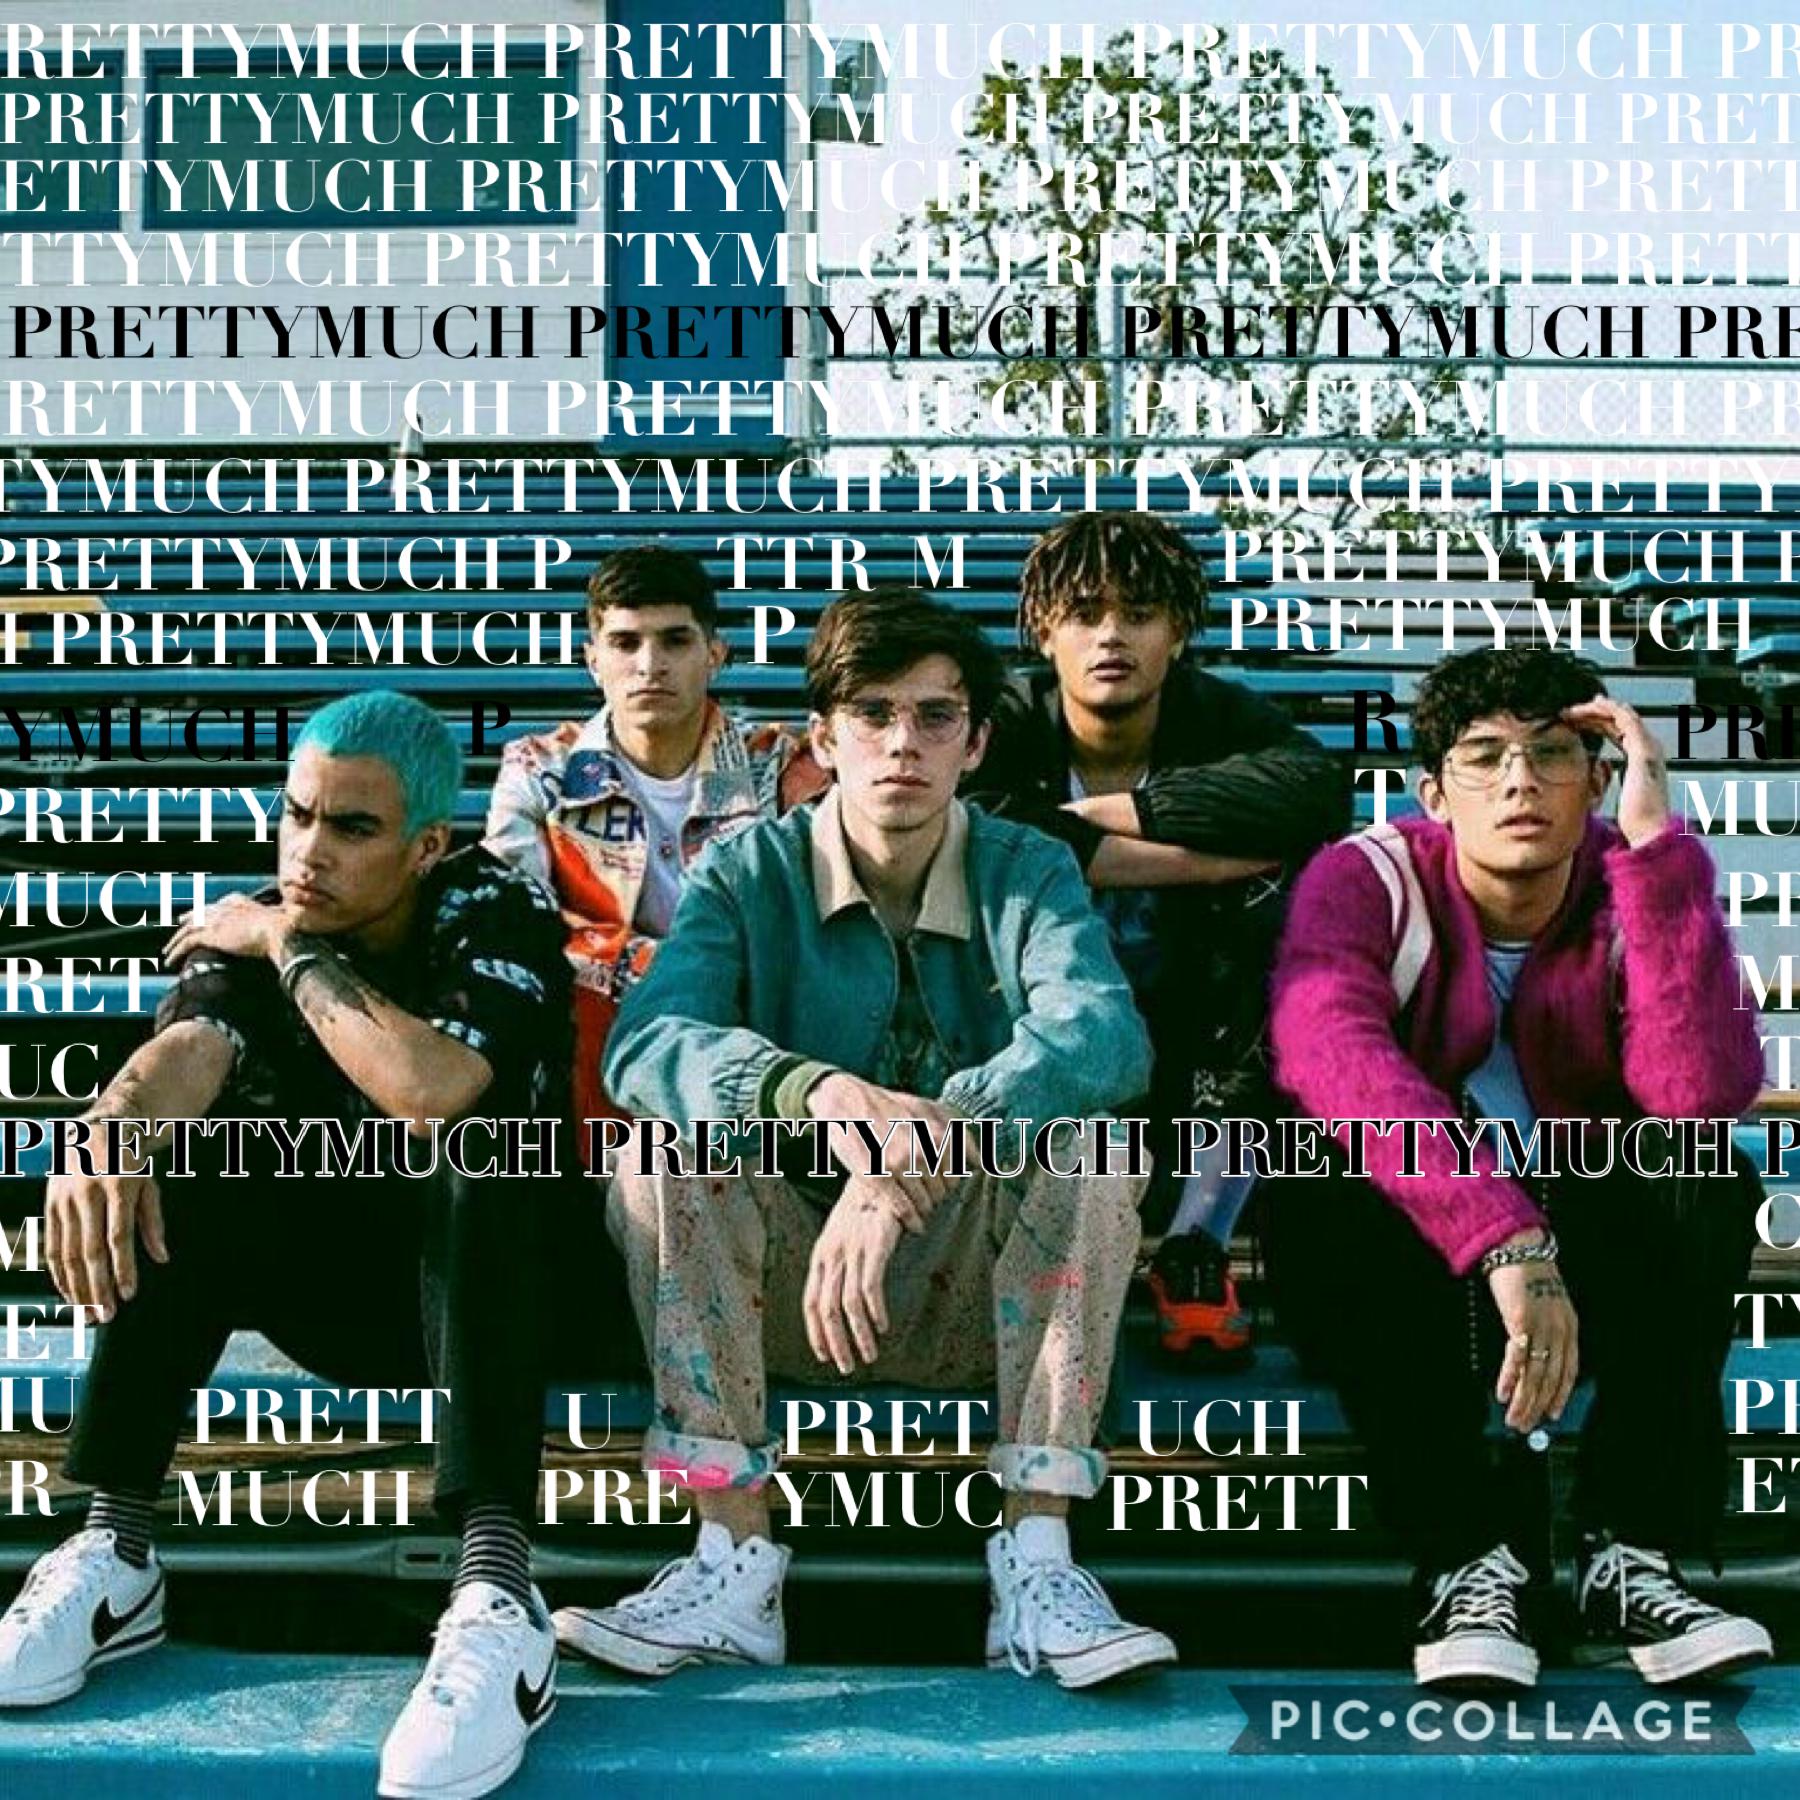 It’s Prettymuch- Best Boyband in the world! 💗😊 I literally wasn’t allowed to anymore 😂 Bit whatever! Comment your favourite song of theirs <3